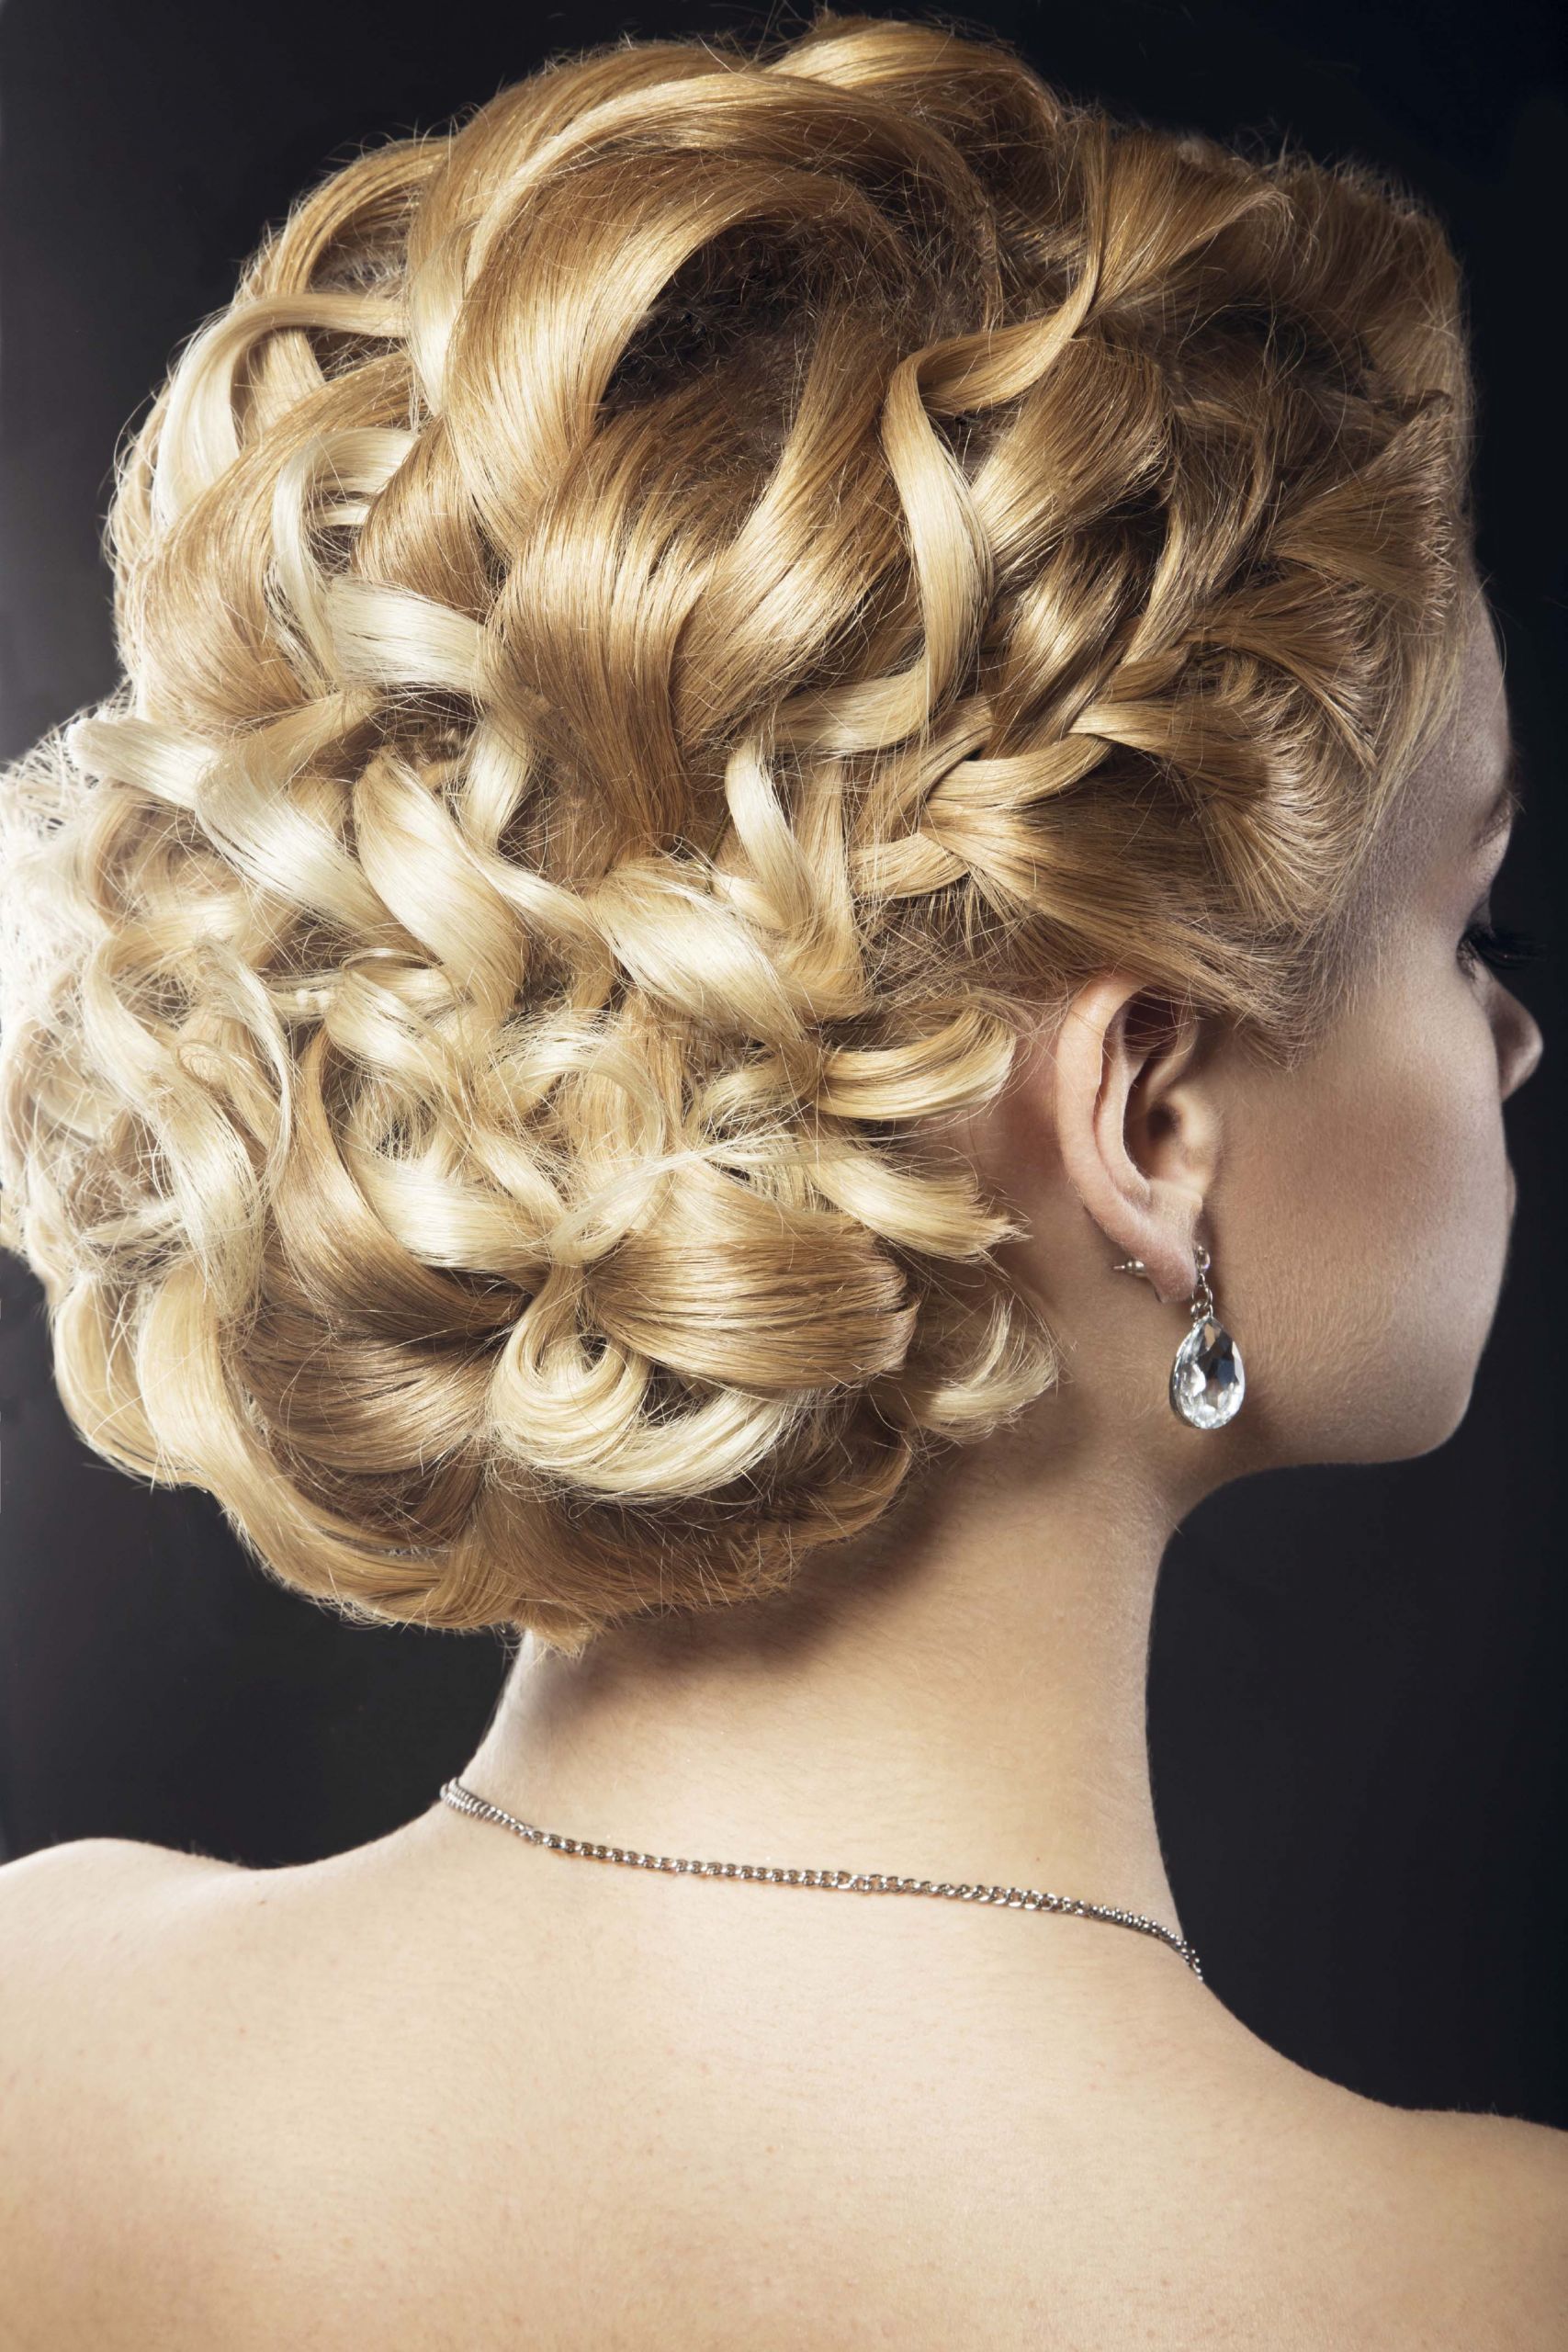 How To Do Wedding Hairstyles Updos
 9 Spring Wedding Updos for Curly Hair